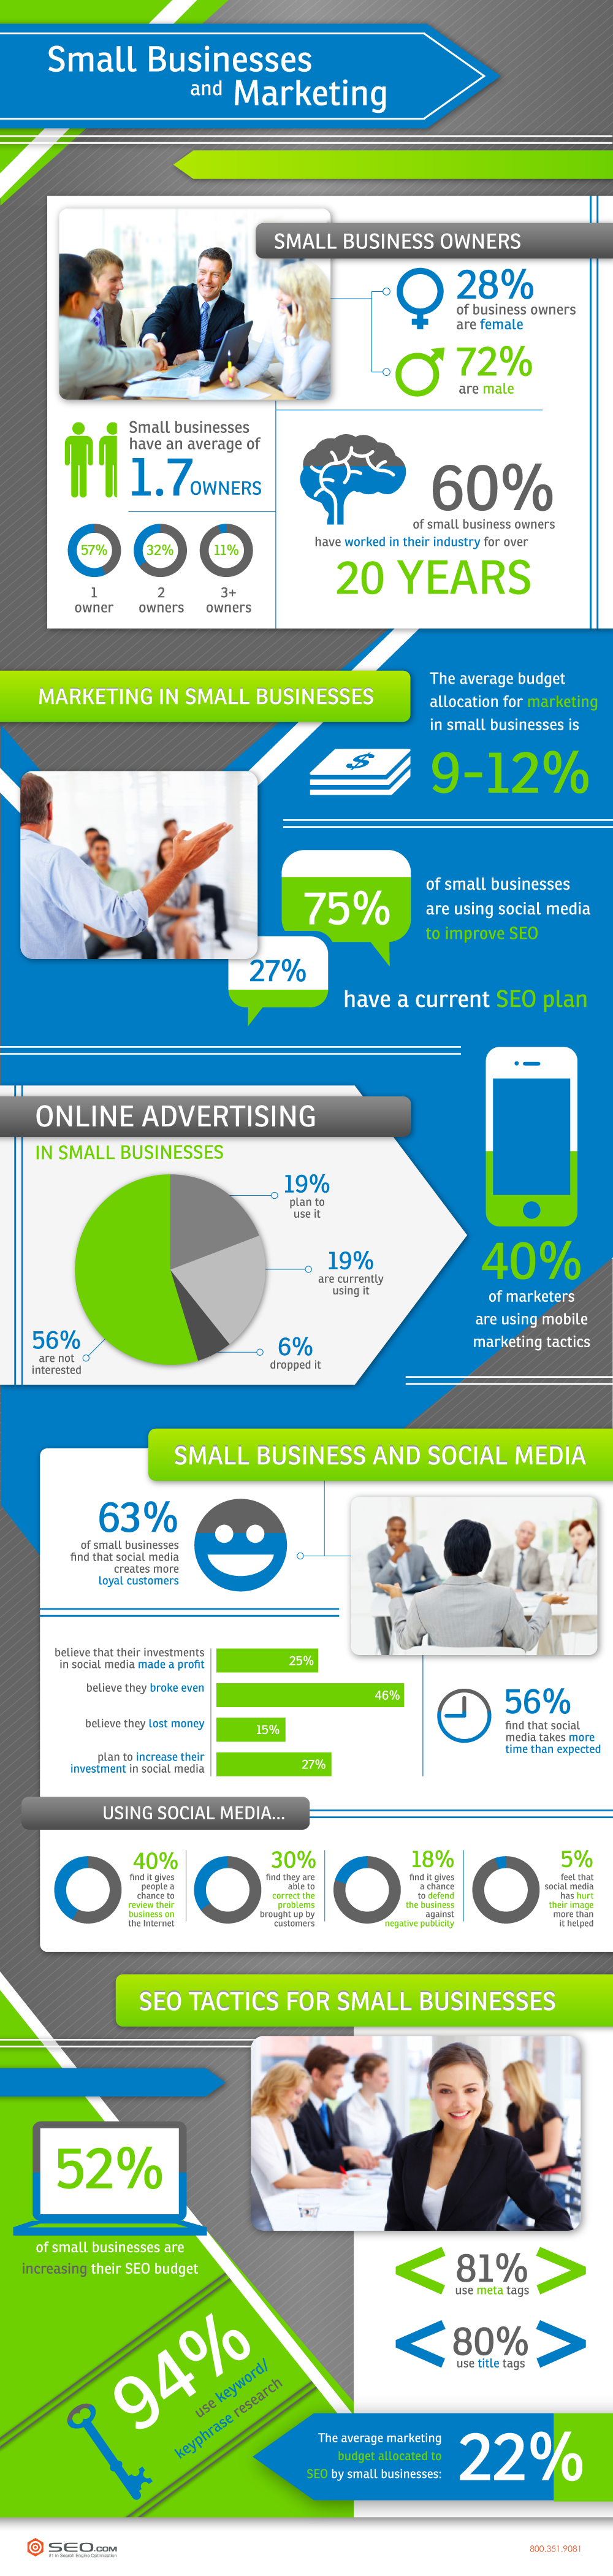 Small-Business-and-Marketing-infographic